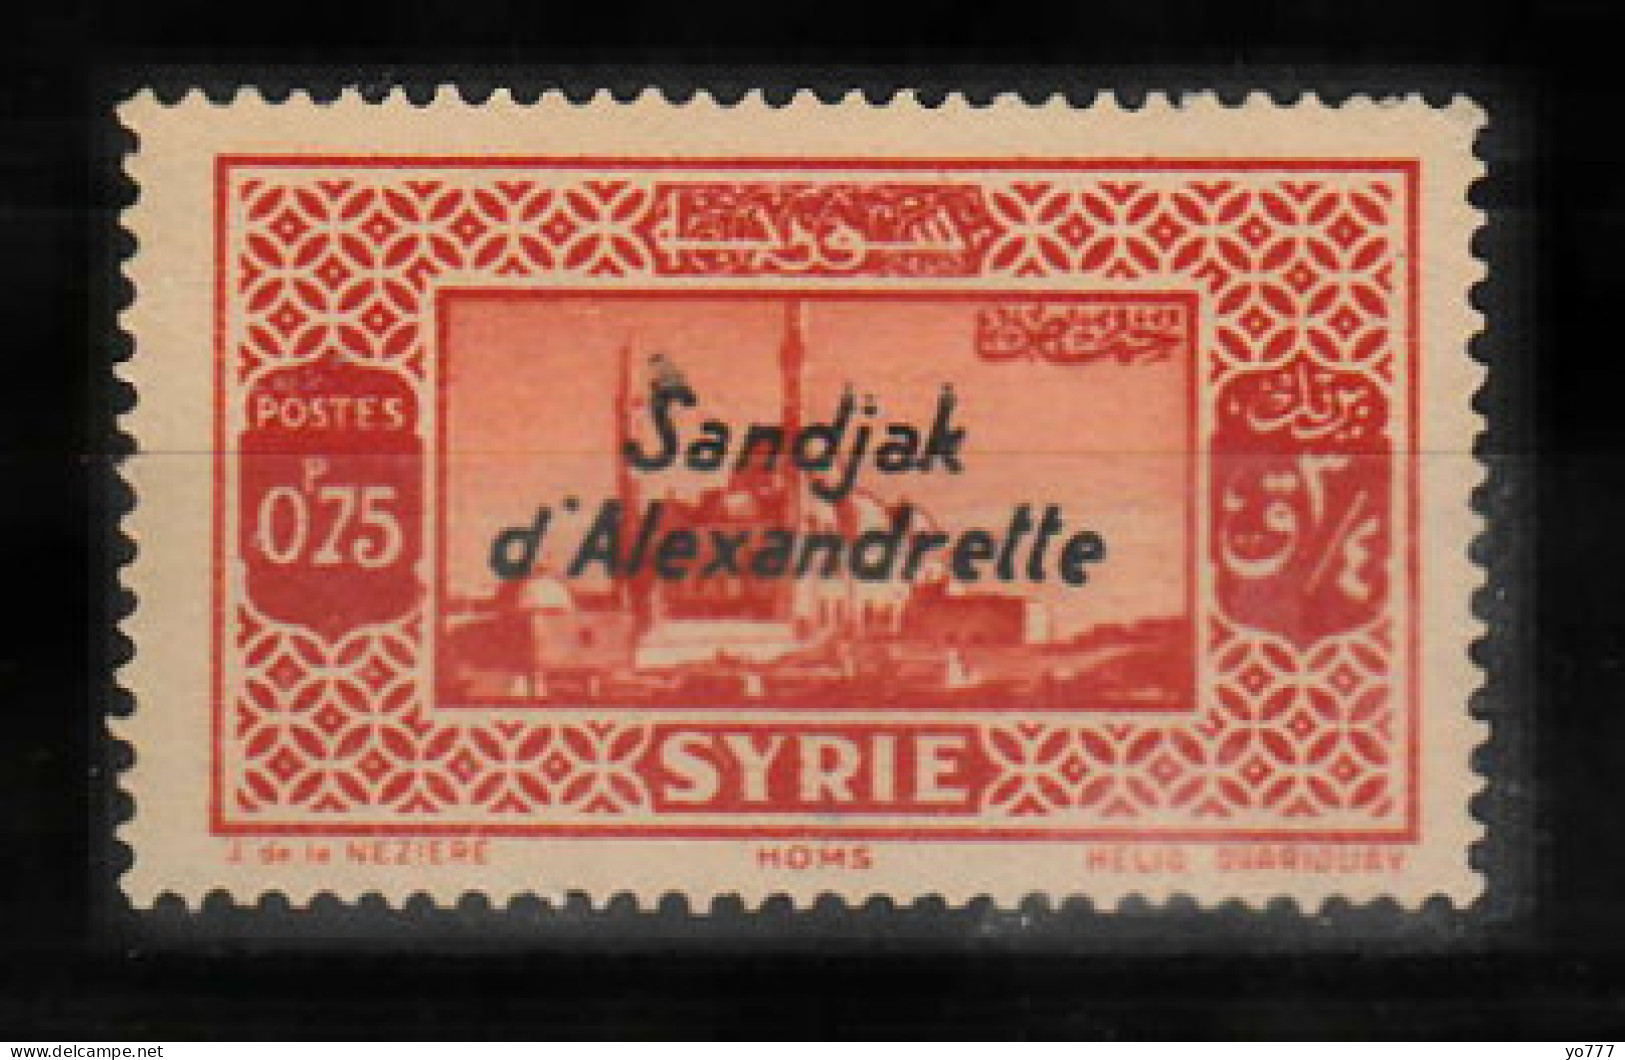 (H-04) 1938 HATAY STAMPS WITH RED AND BLACK SANDJAK D'ALEXANDRETTE OVERPRINT ON SYRIA POSTAGE STAMPS MH* NO GUM - 1934-39 Sandjak Alexandrette & Hatay